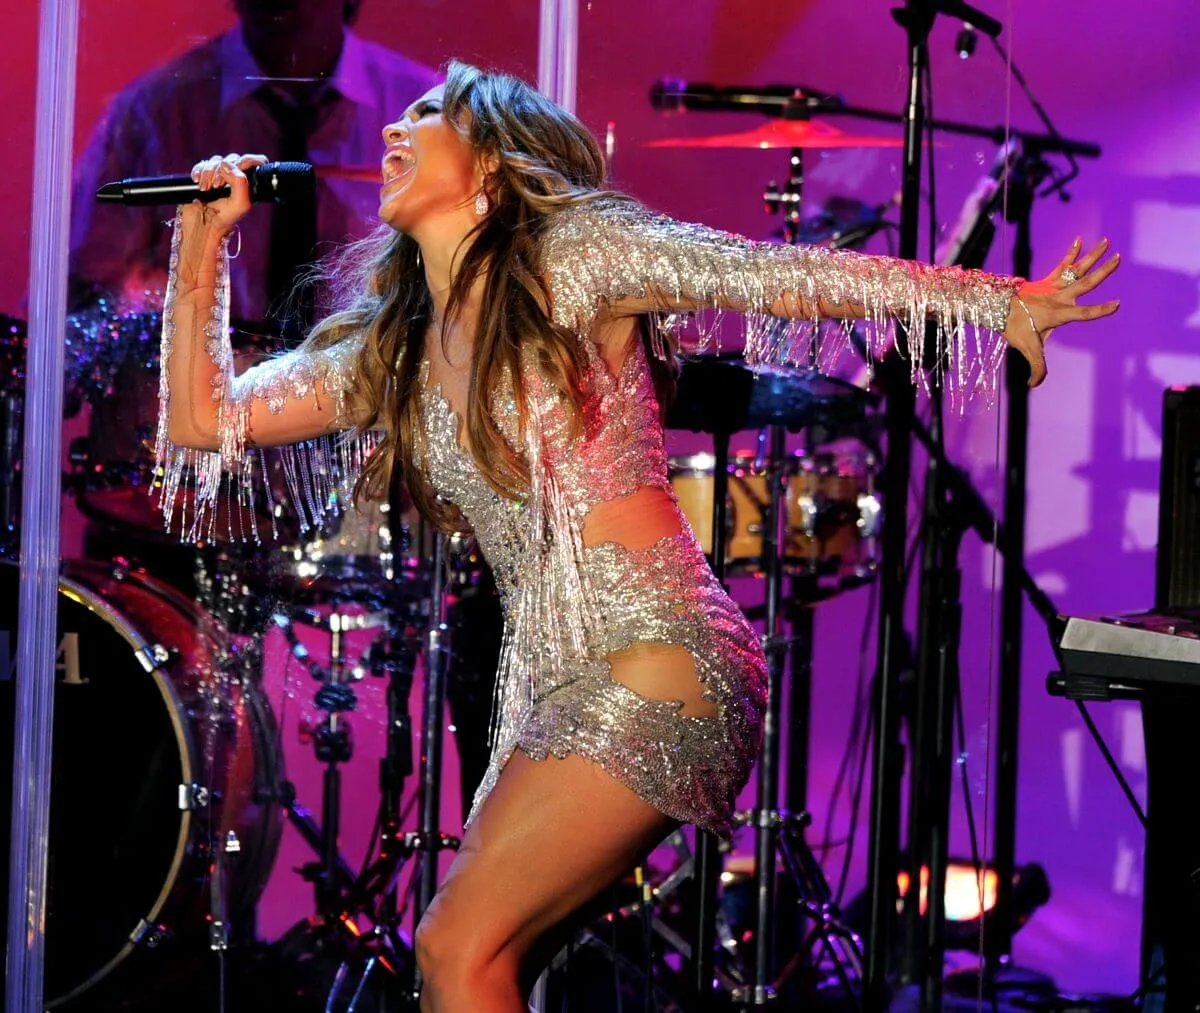 Jennifer Lopez wears a silver dress and sings into a microphone.